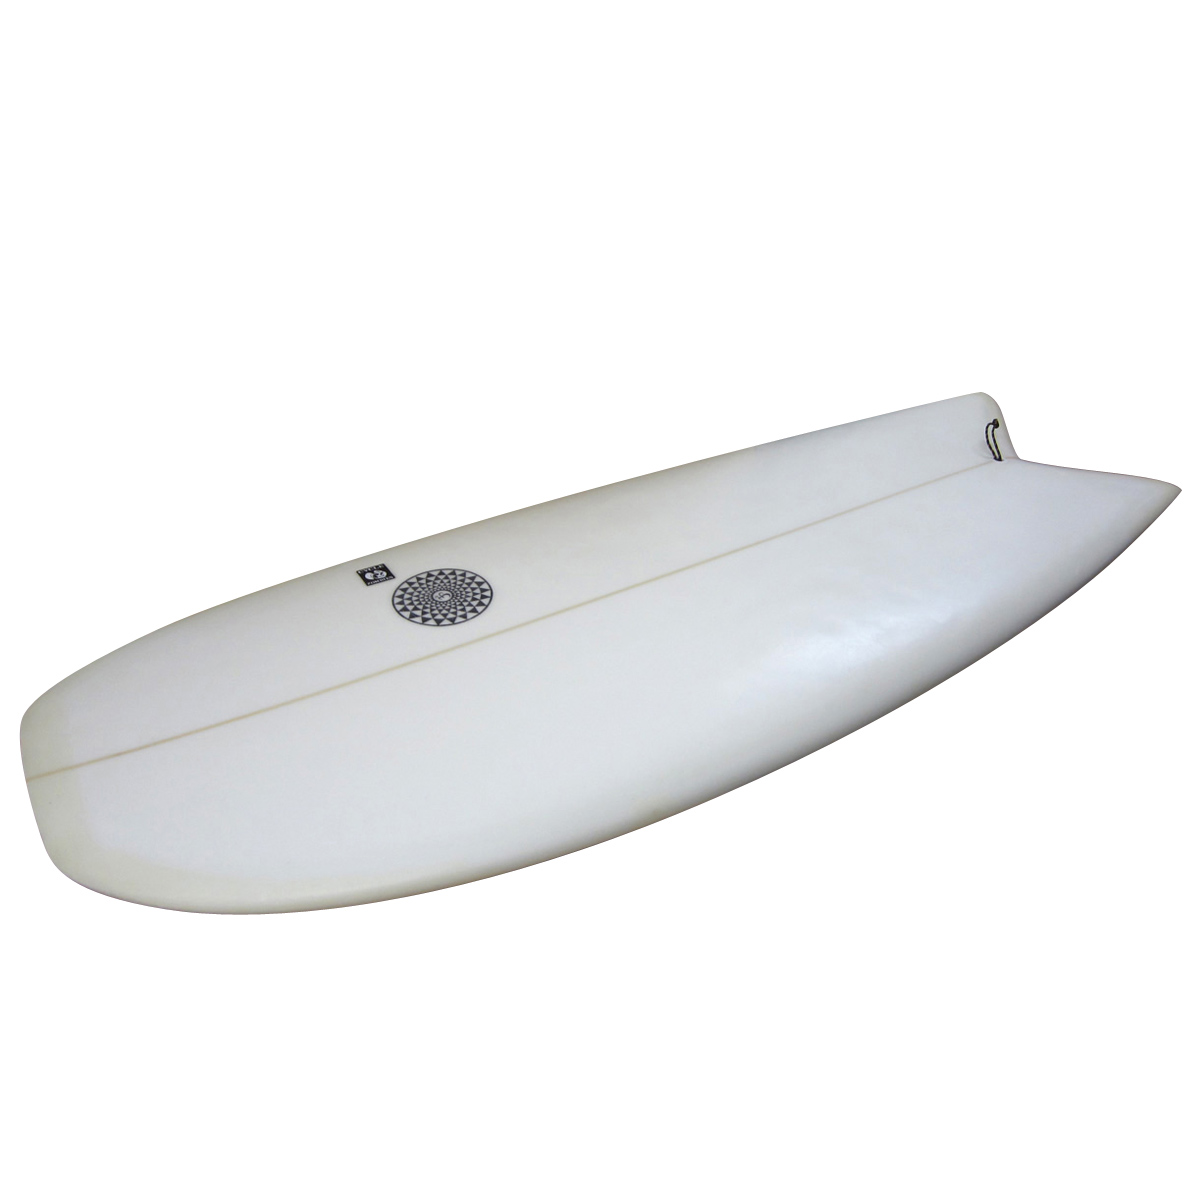 JIM HINES / SQUARE NOSE SIMMONS 5`0 SCOTTY STOPNIK Personal Board